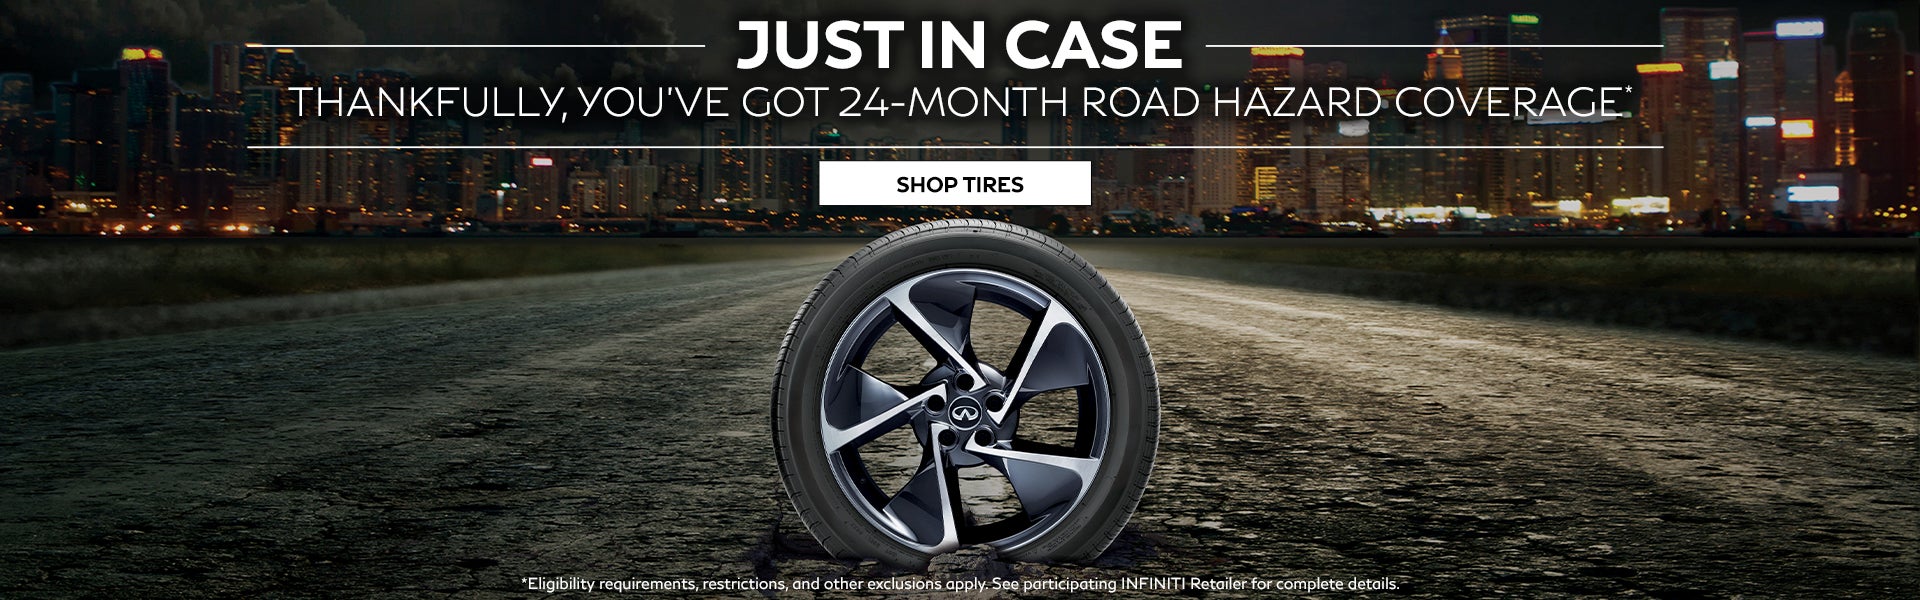 Receive a $70 rebate on the purchase of 4 eligible tires. Of